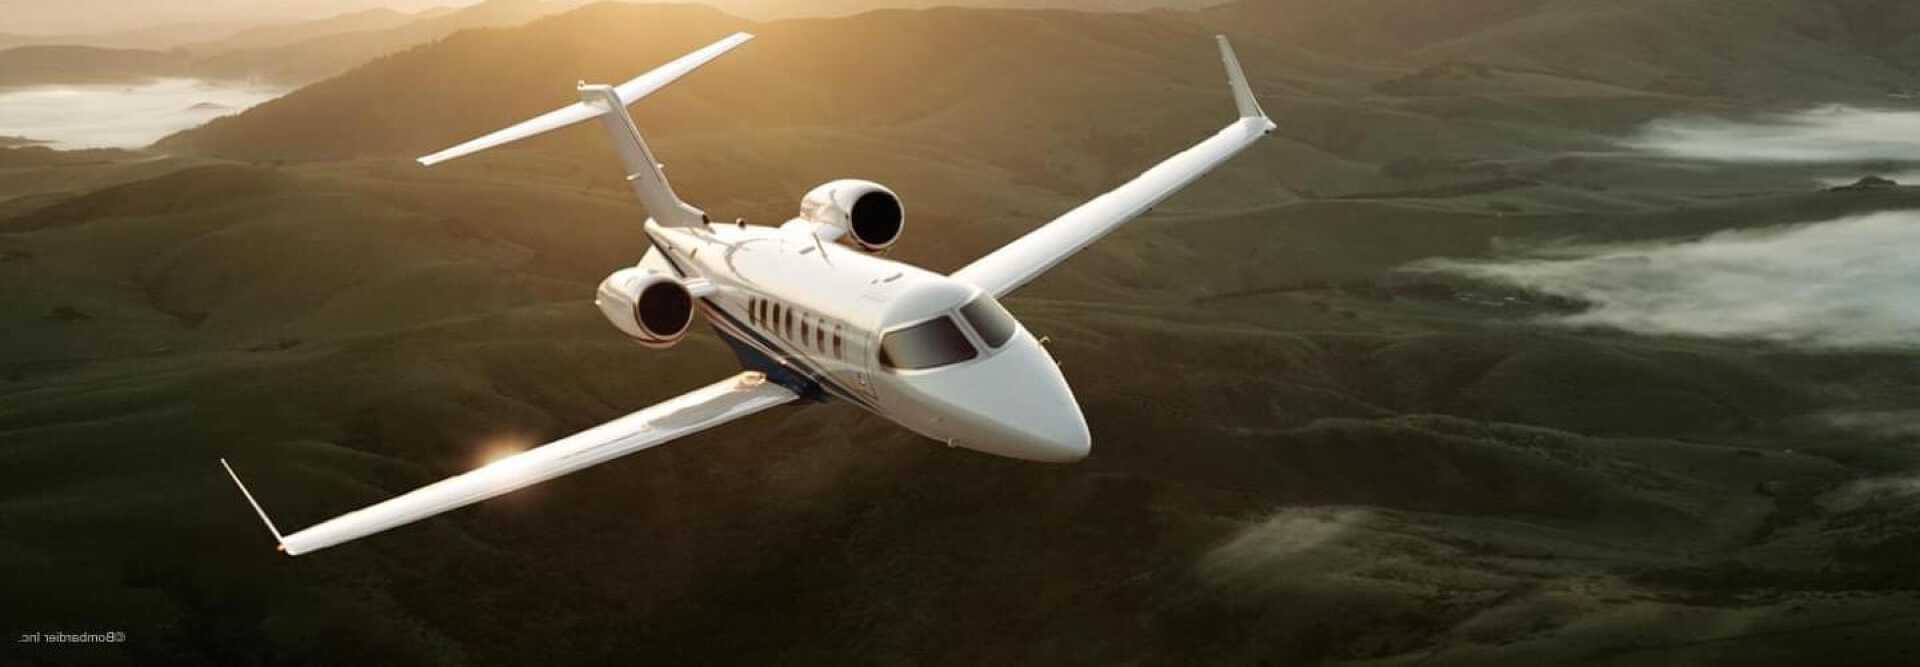 Light Jet Bombardier Learjet 40XR to charter with LunaJets, short-haul travel, light jet, spacious, comfort and performace